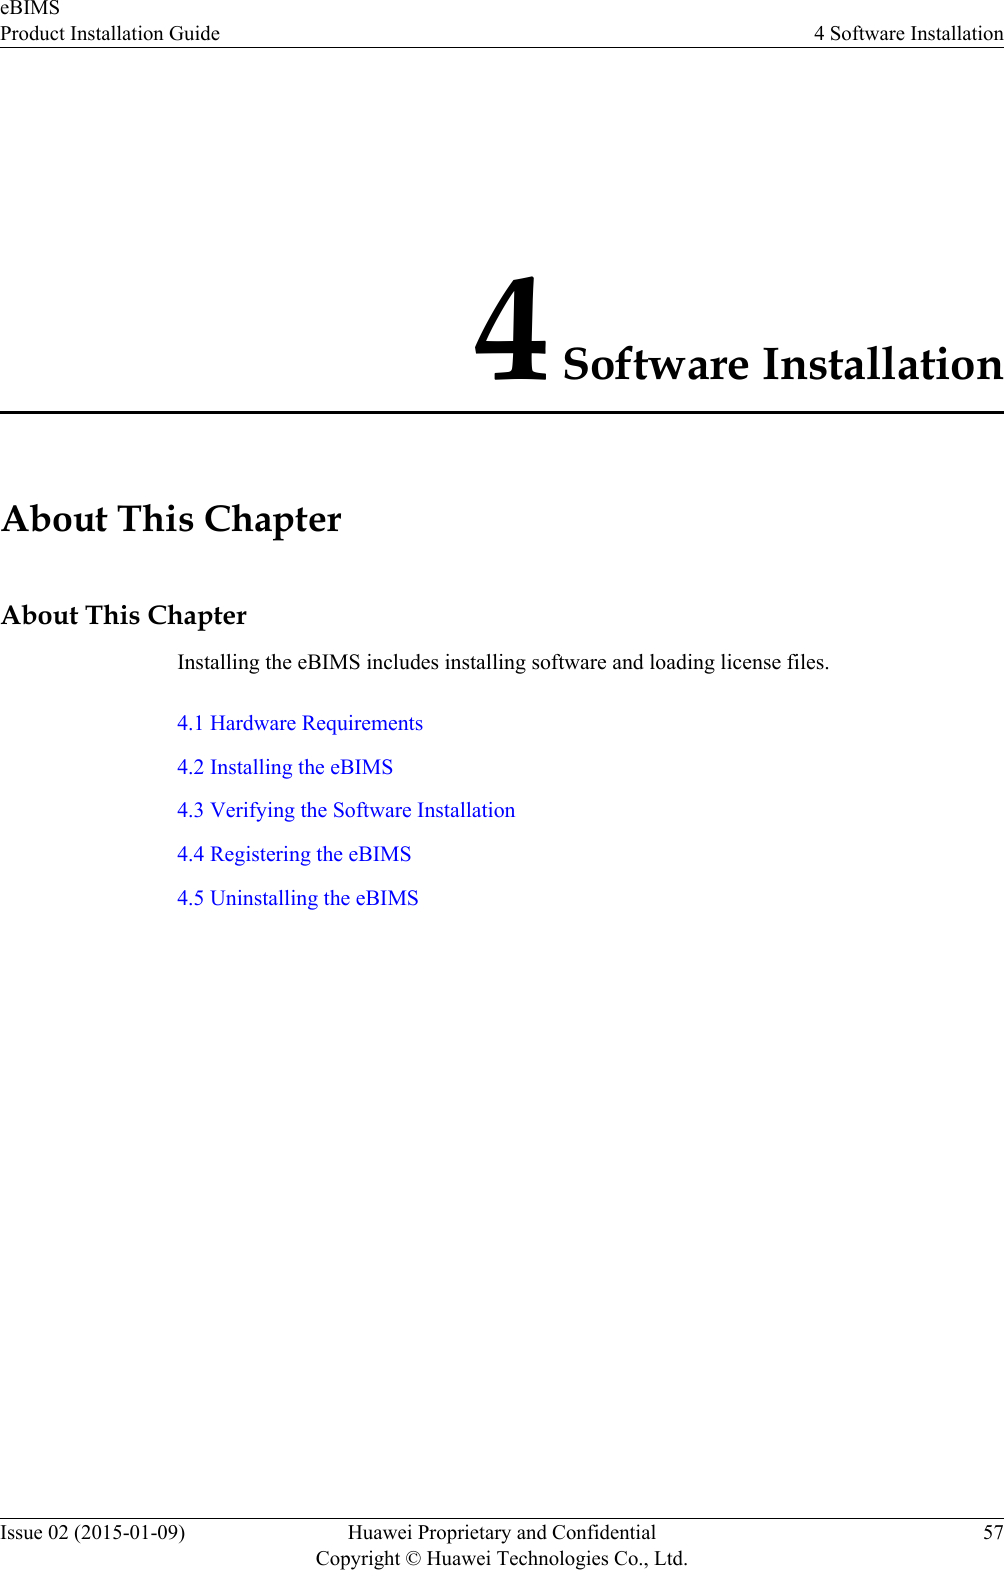 4 Software InstallationAbout This ChapterAbout This ChapterInstalling the eBIMS includes installing software and loading license files.4.1 Hardware Requirements4.2 Installing the eBIMS4.3 Verifying the Software Installation4.4 Registering the eBIMS4.5 Uninstalling the eBIMSeBIMSProduct Installation Guide 4 Software InstallationIssue 02 (2015-01-09) Huawei Proprietary and ConfidentialCopyright © Huawei Technologies Co., Ltd.57